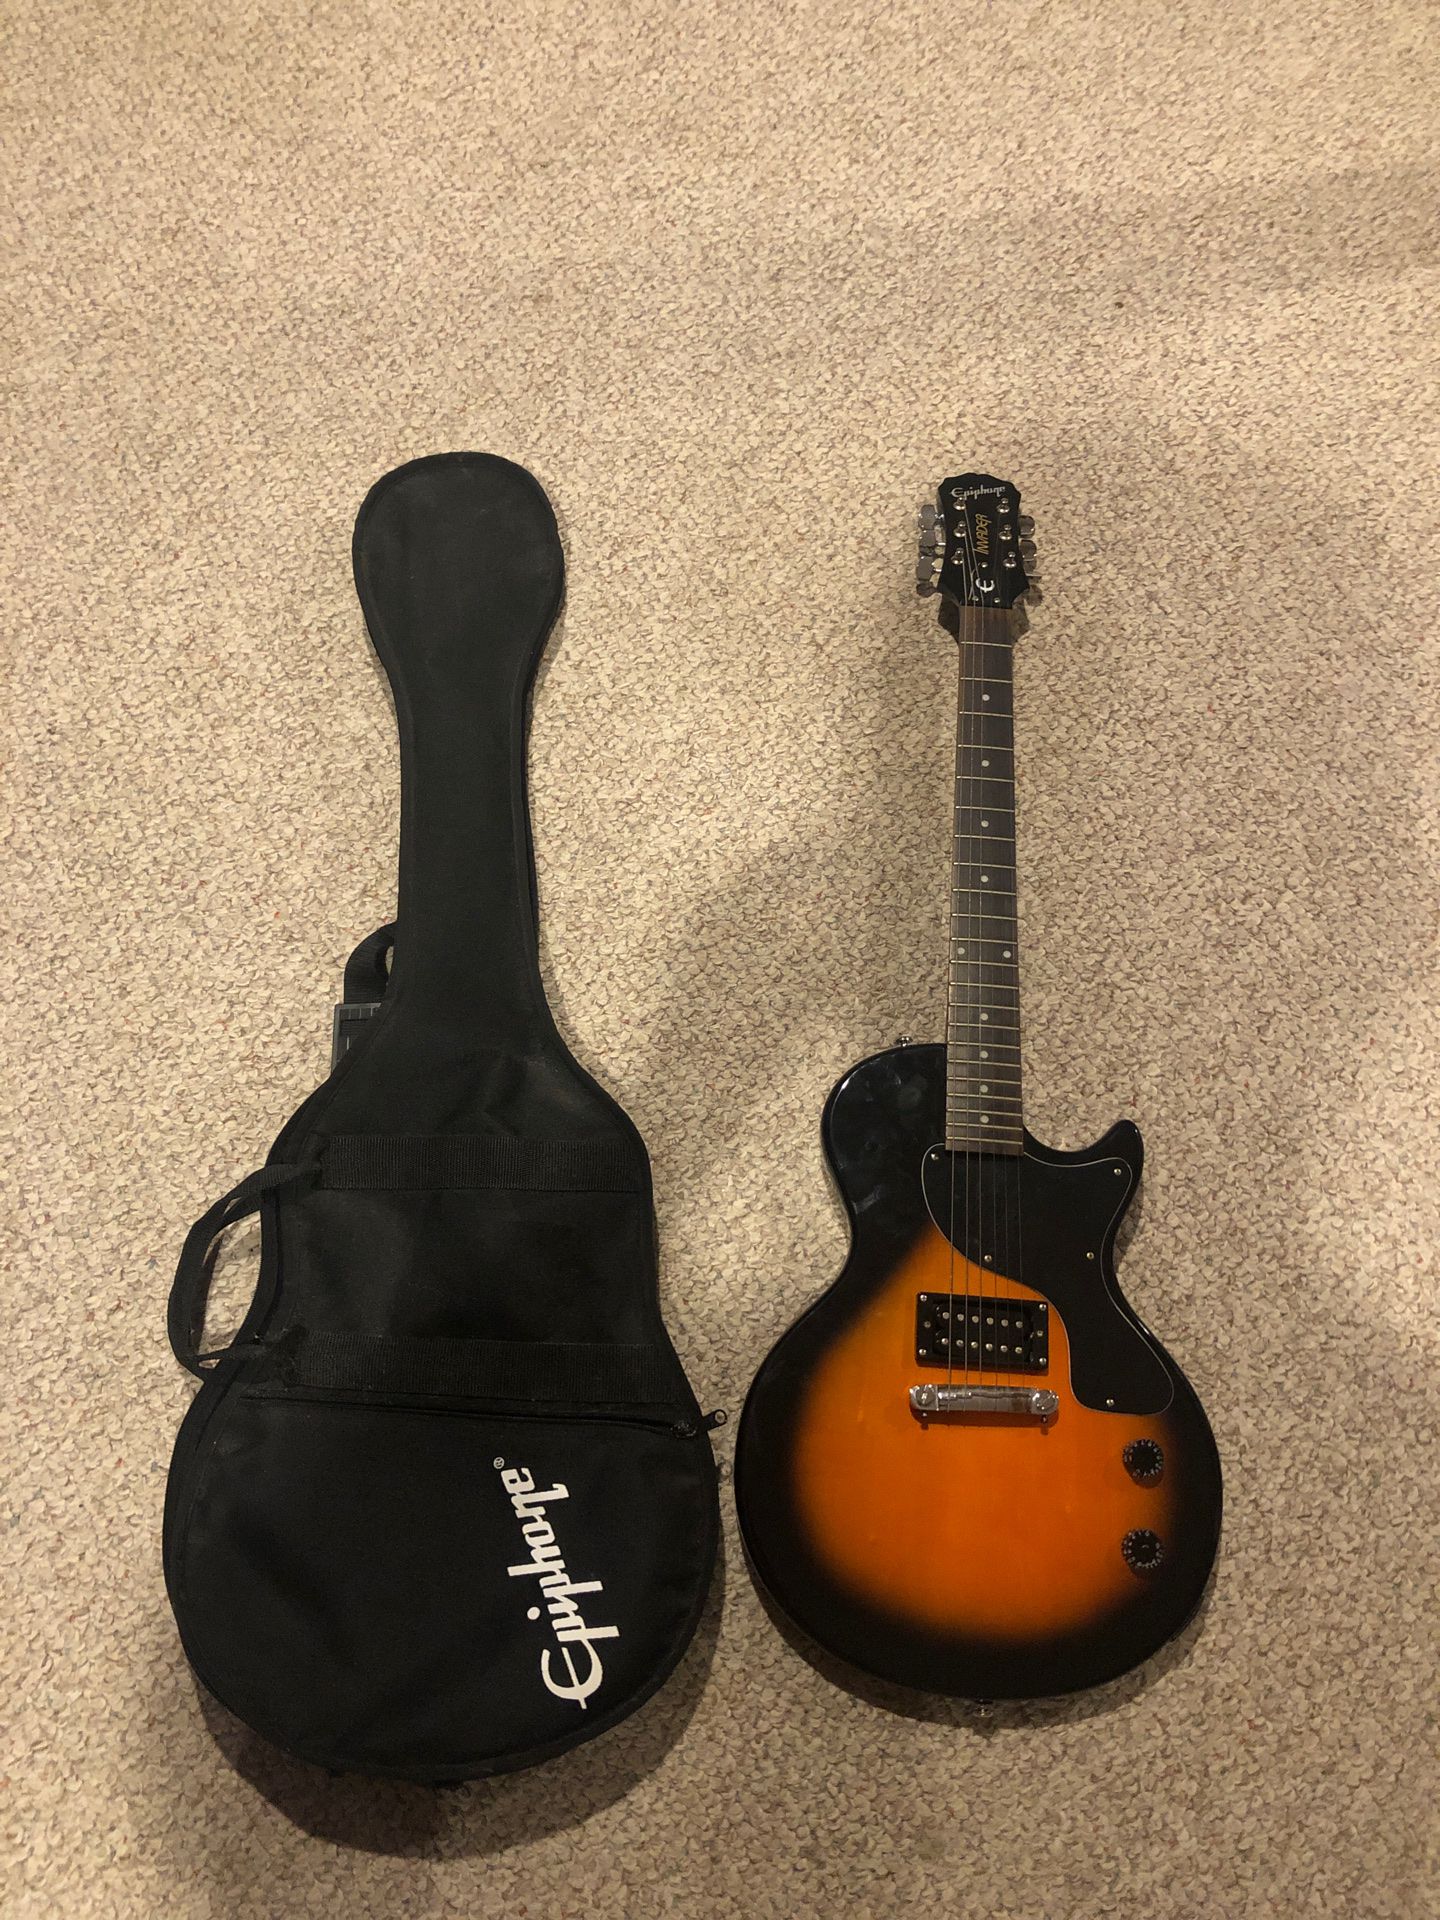 Epiphone Invader electric guitar WITH case Epiphone case